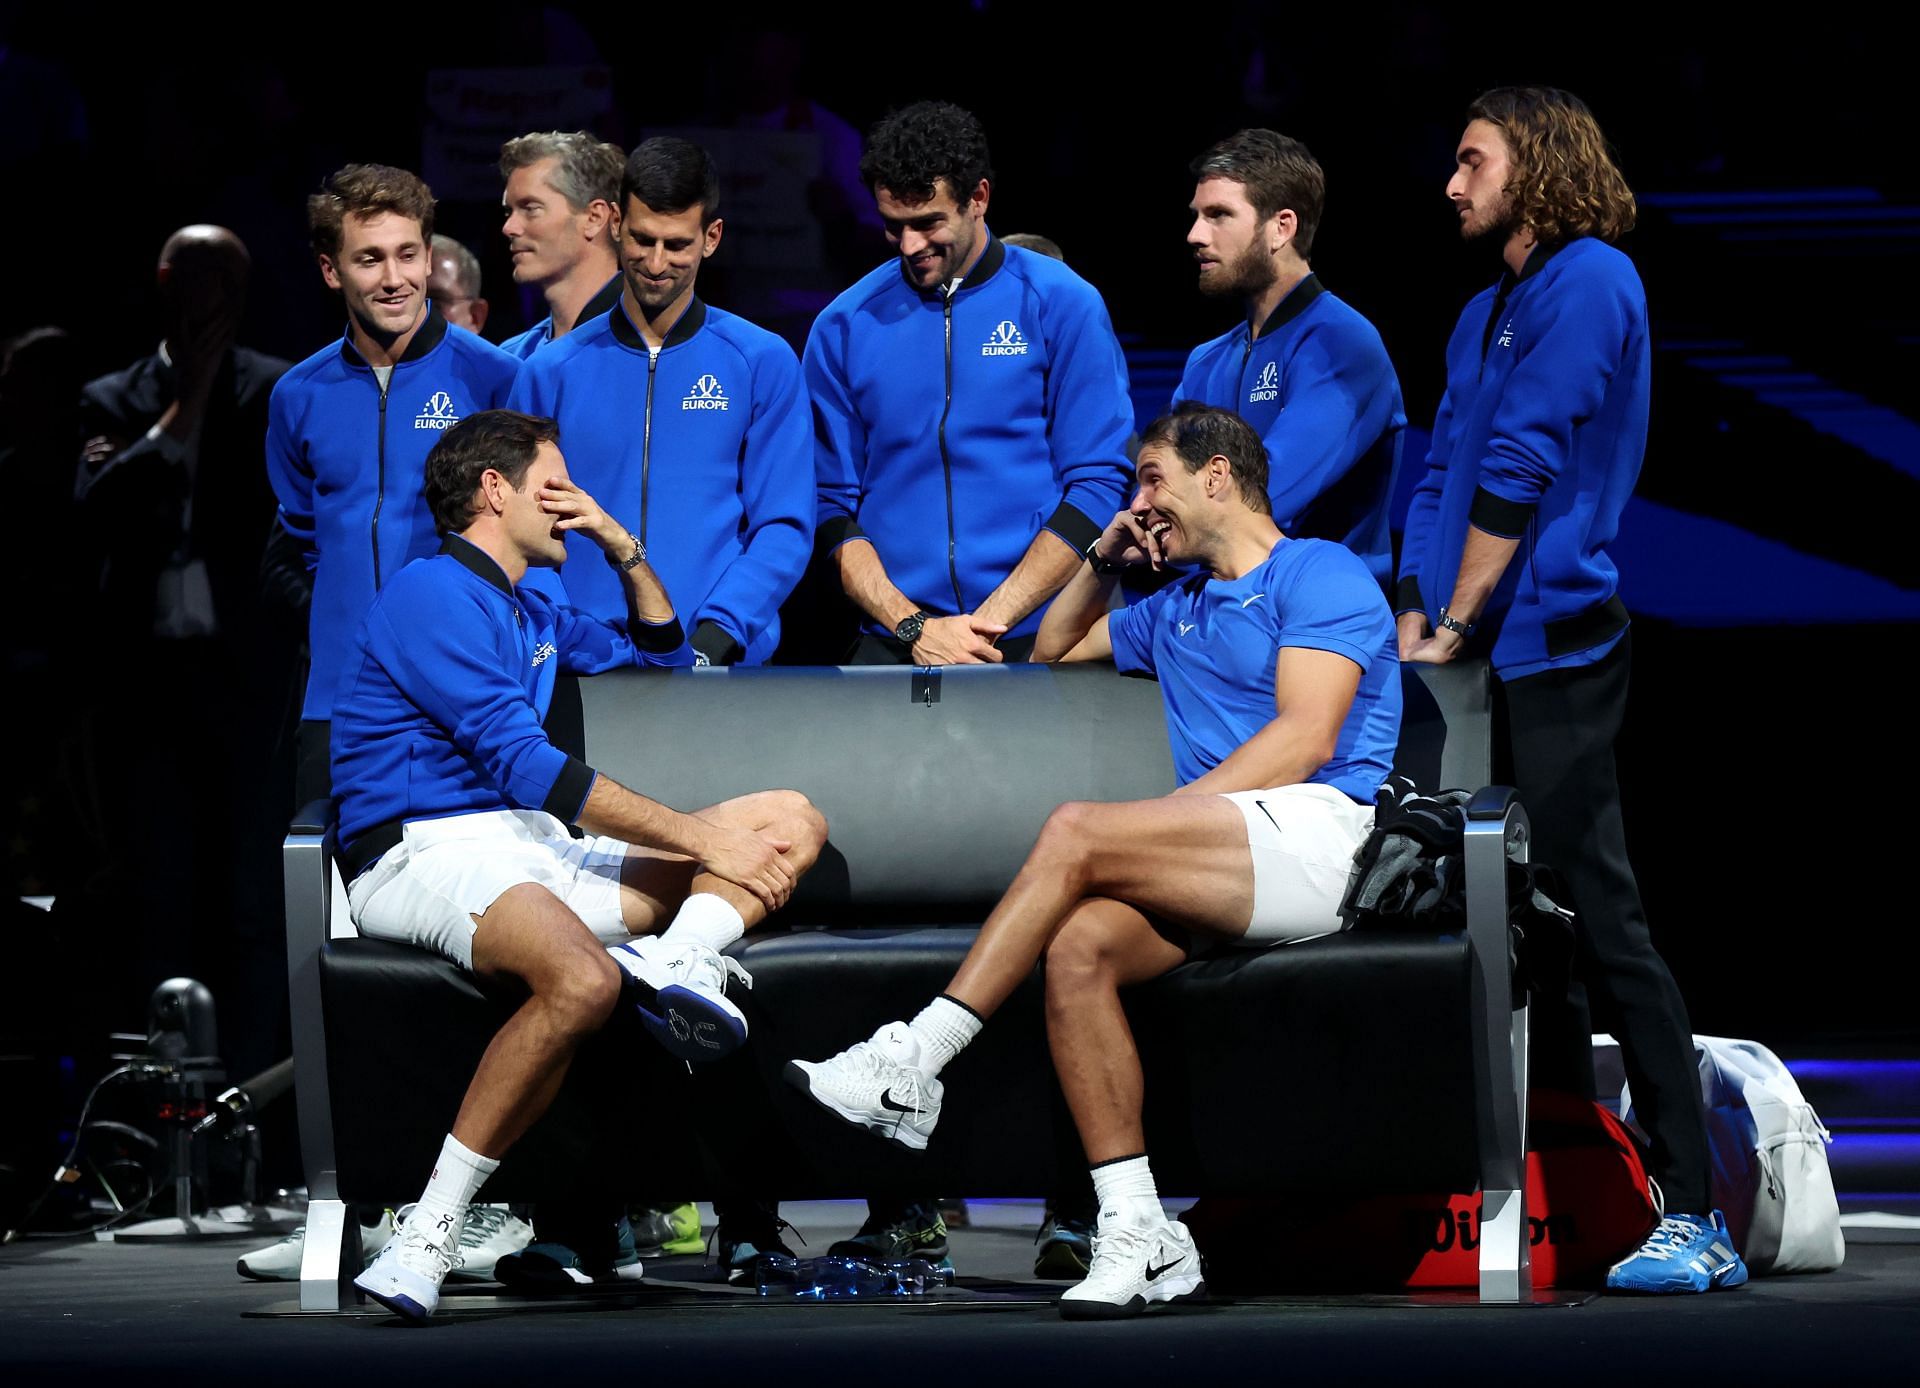 Laver Cup 2022 Schedule Today TV schedule, start time, order of play, live streaming details and more Day 2